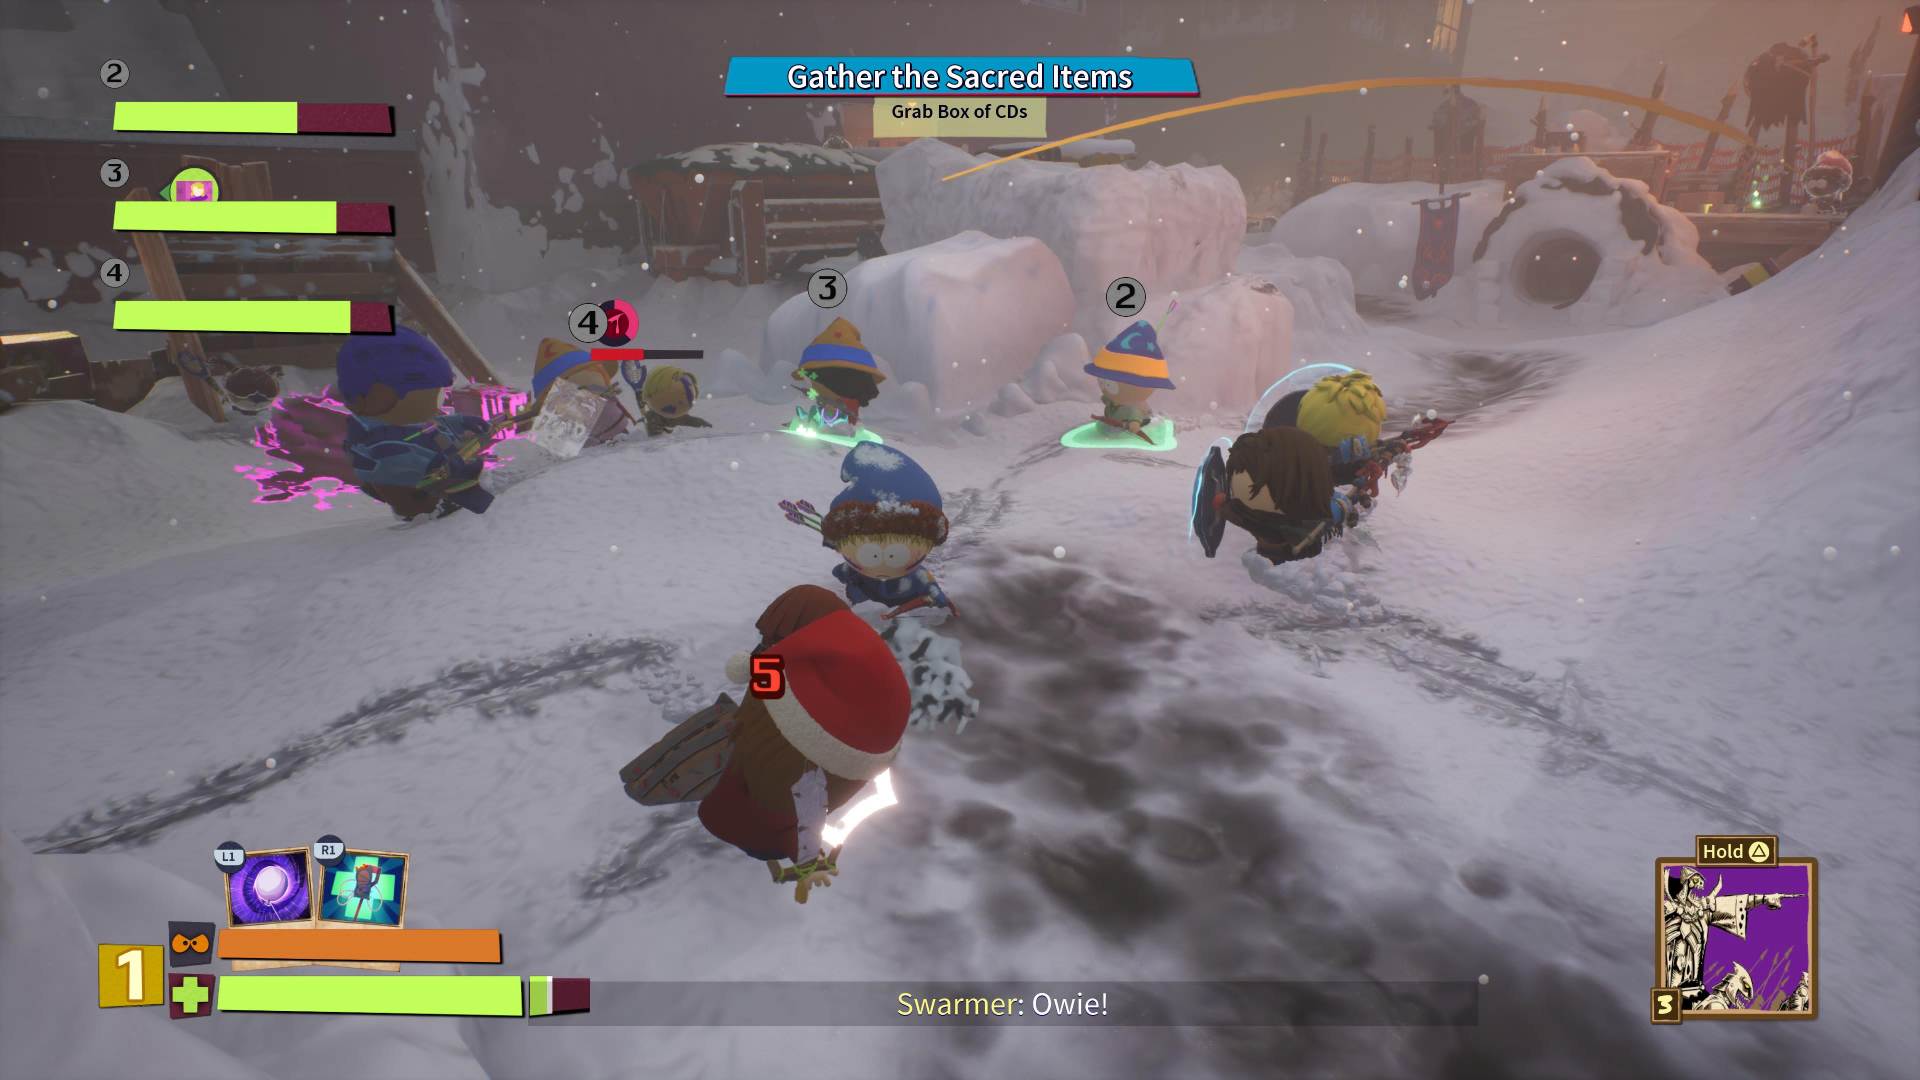 South Park: Snow Day! gameplay during combat